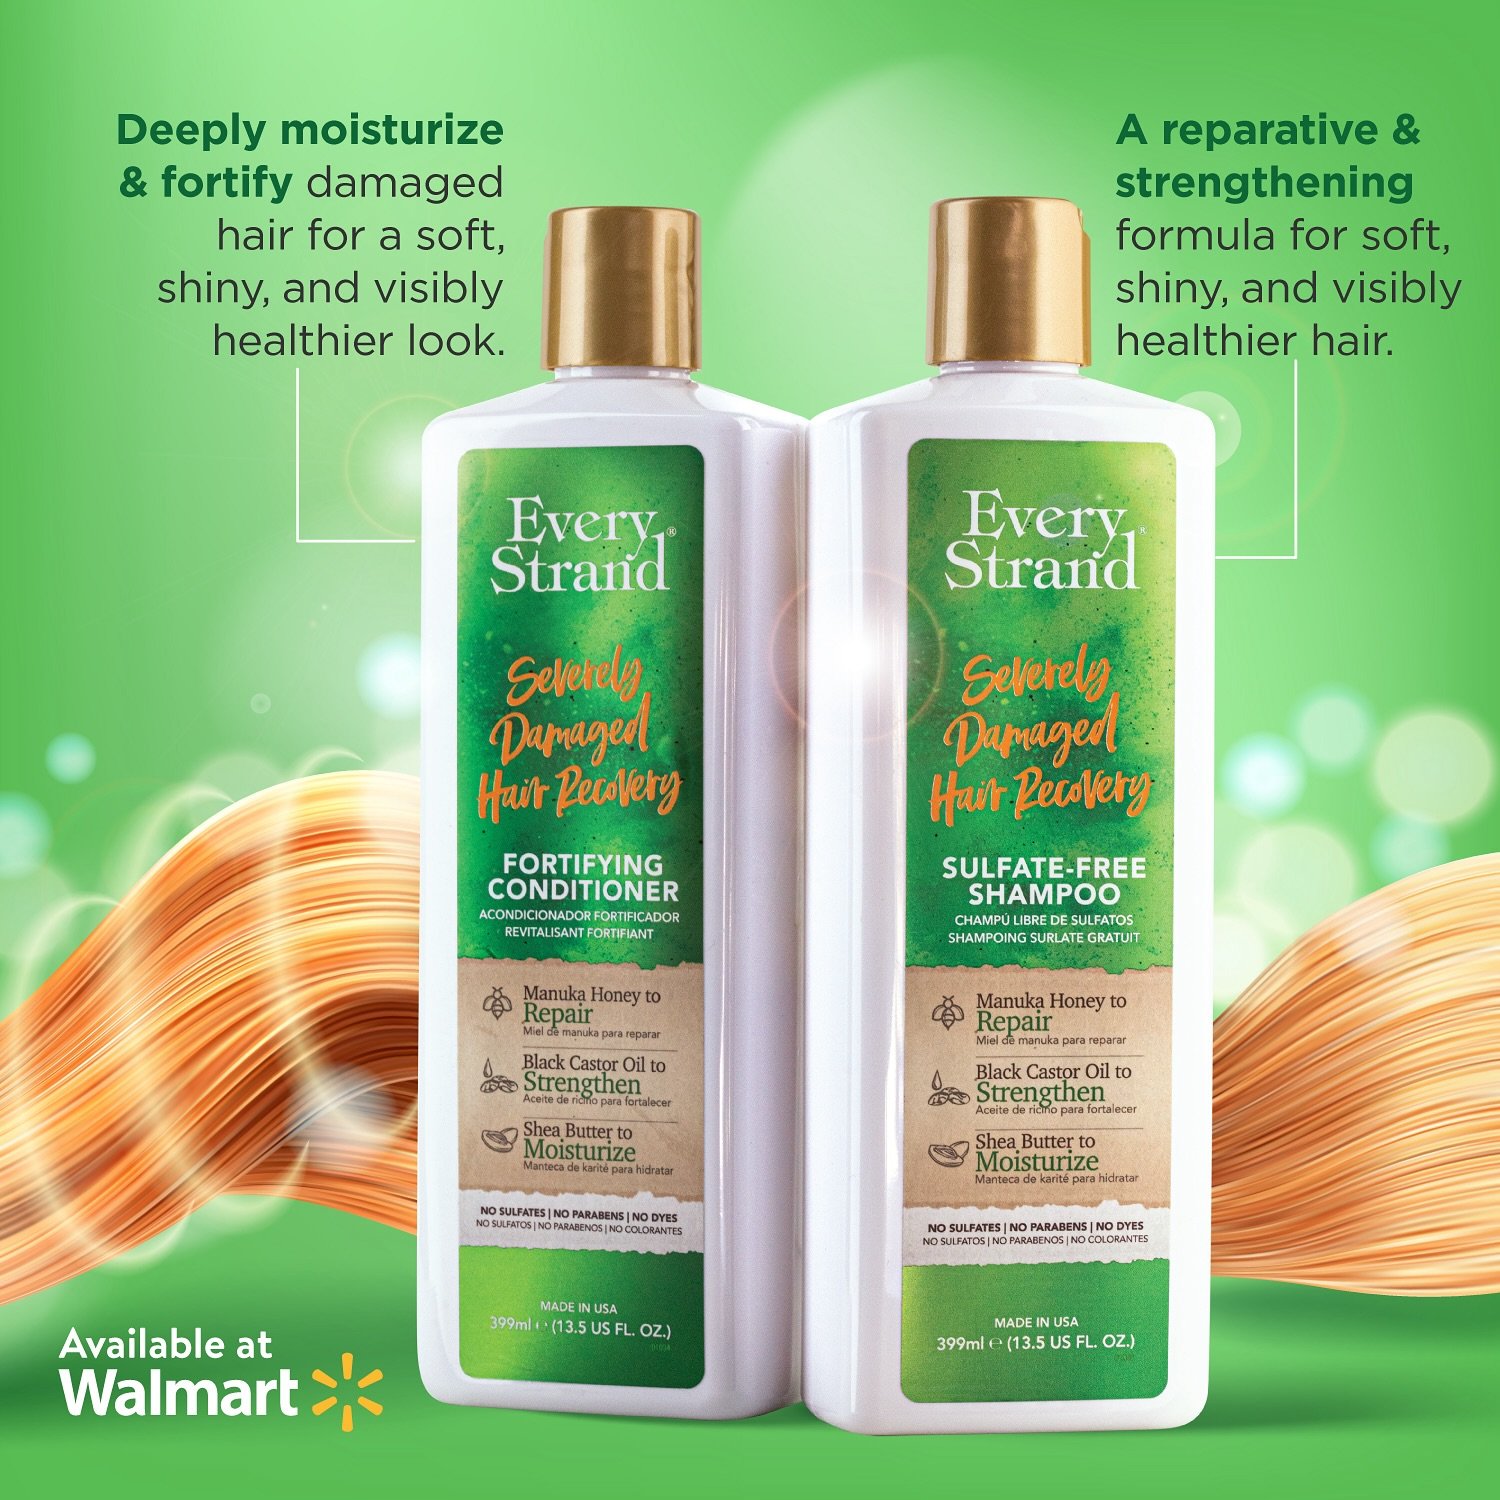 Restore your hair&rsquo;s strength and shine with Every Strand&rsquo;s Severely Damaged Shampoo and Conditioner. 💚✨

Find our products at your local Walmart! 

#EveryStrand #SeverelyDamaged #Hair #HairProducts #EveryStrandUSA #MadeInUSA #Walmart #Ev